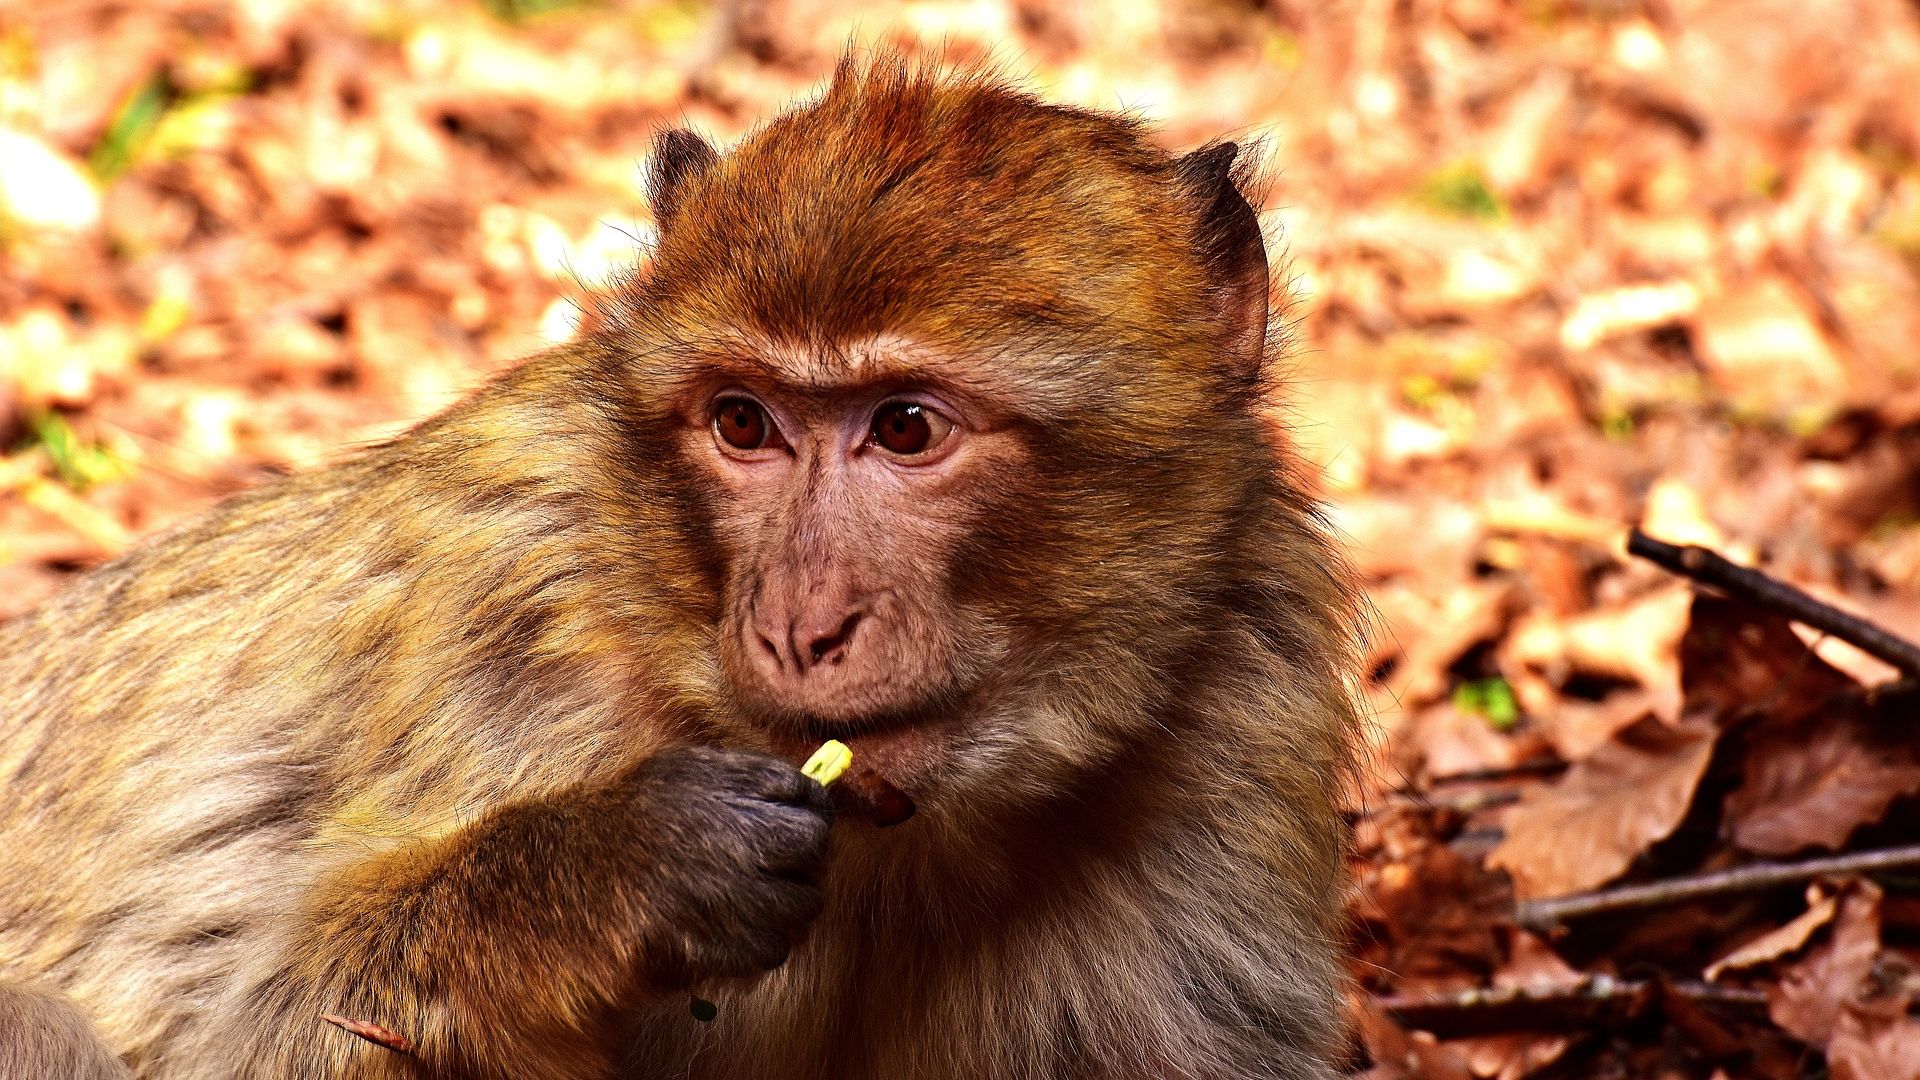 Wallpaper Barbary macaque, apes, monkey, wild animal